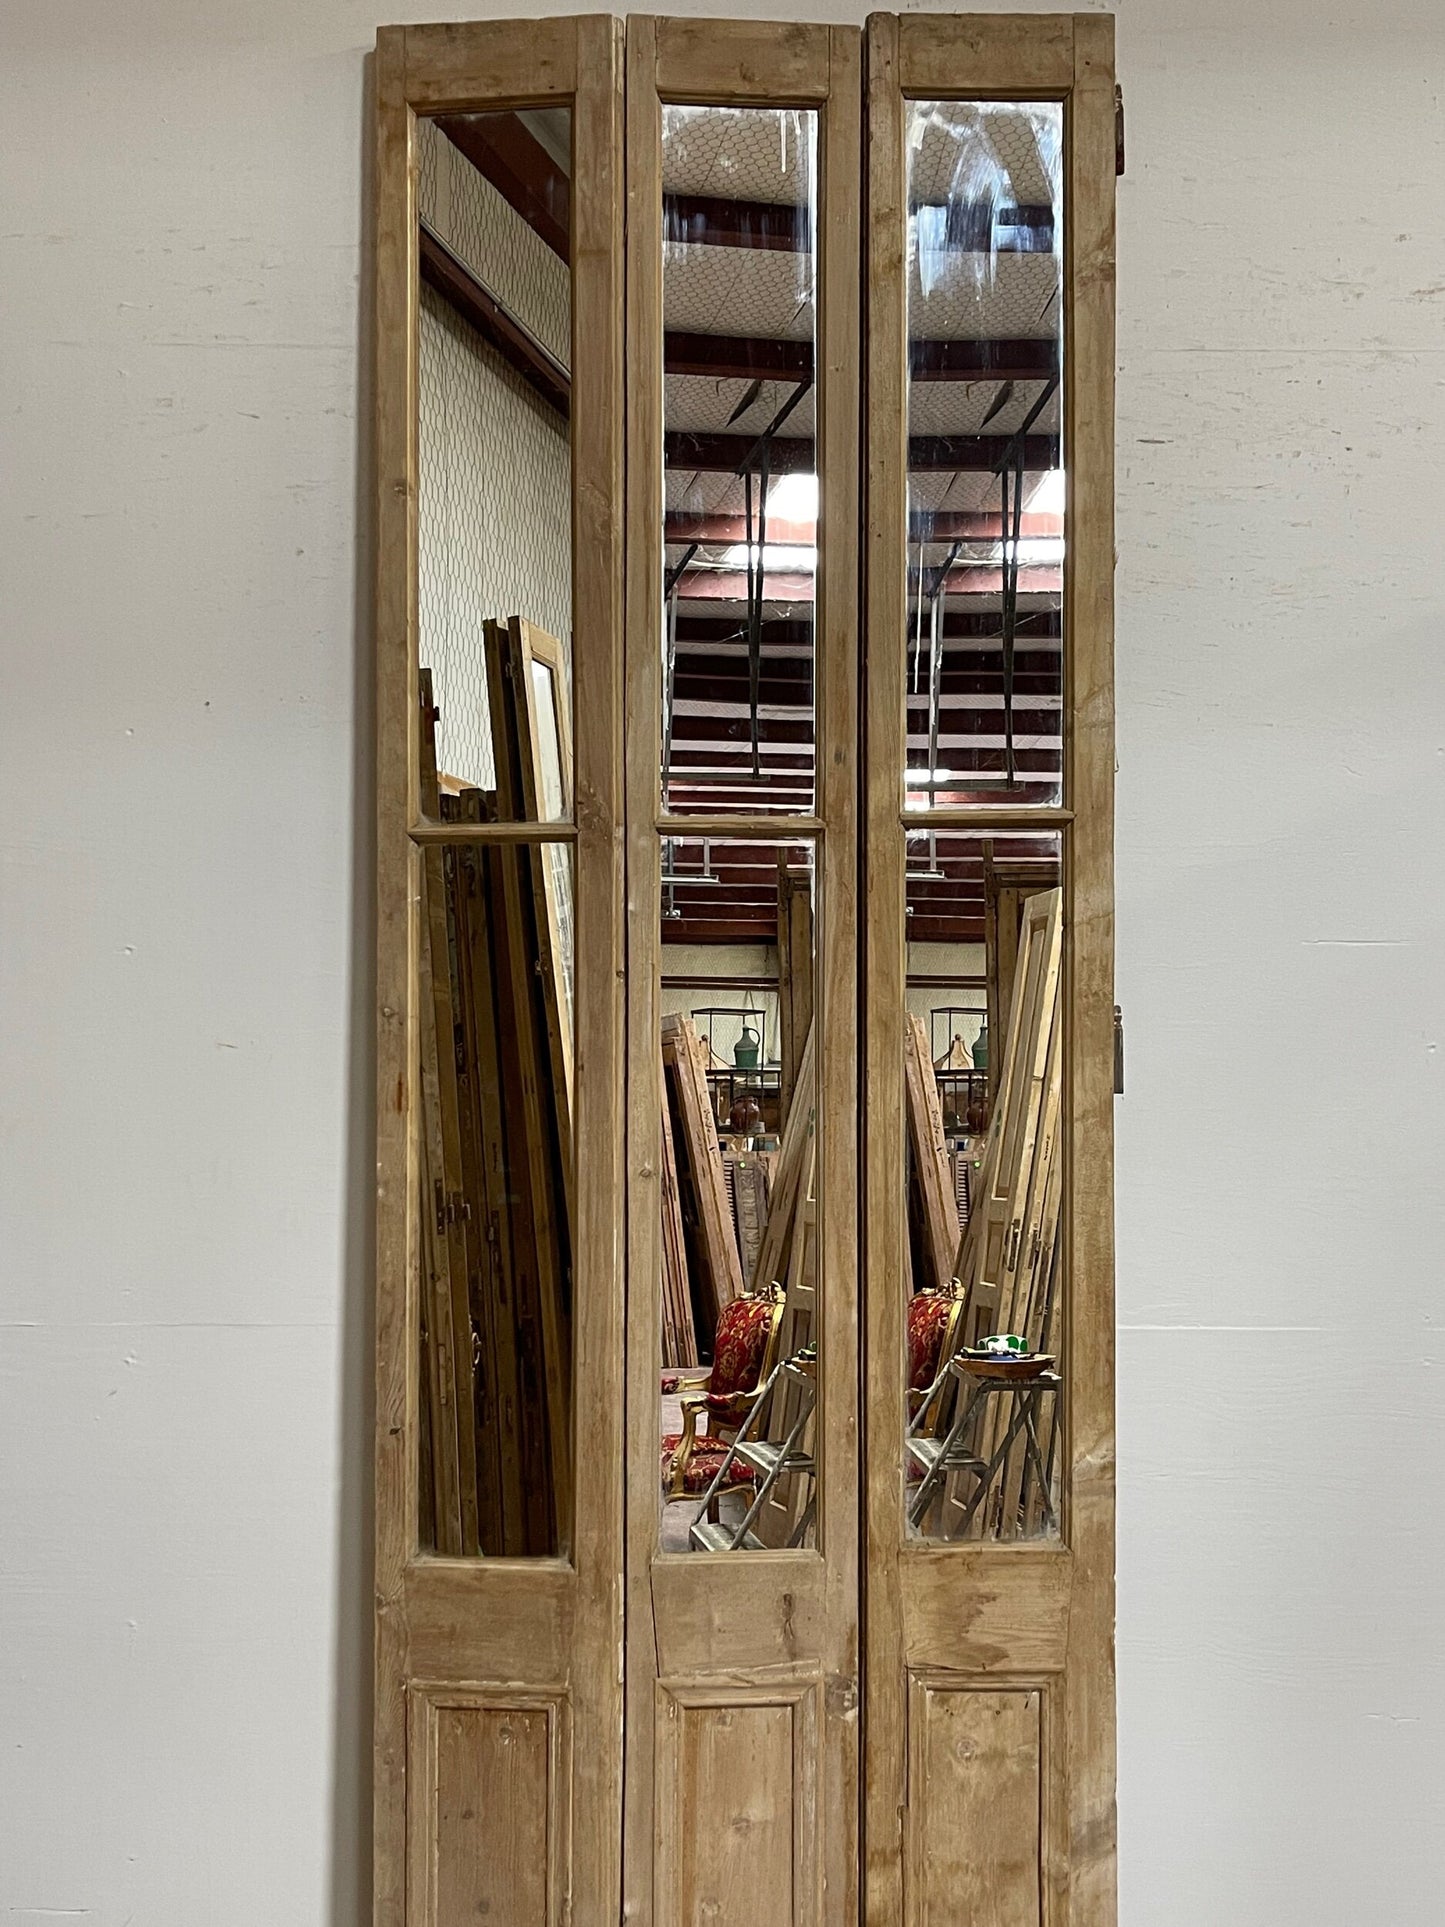 Antique French doors with mirrors  (111.5x35) H0240s